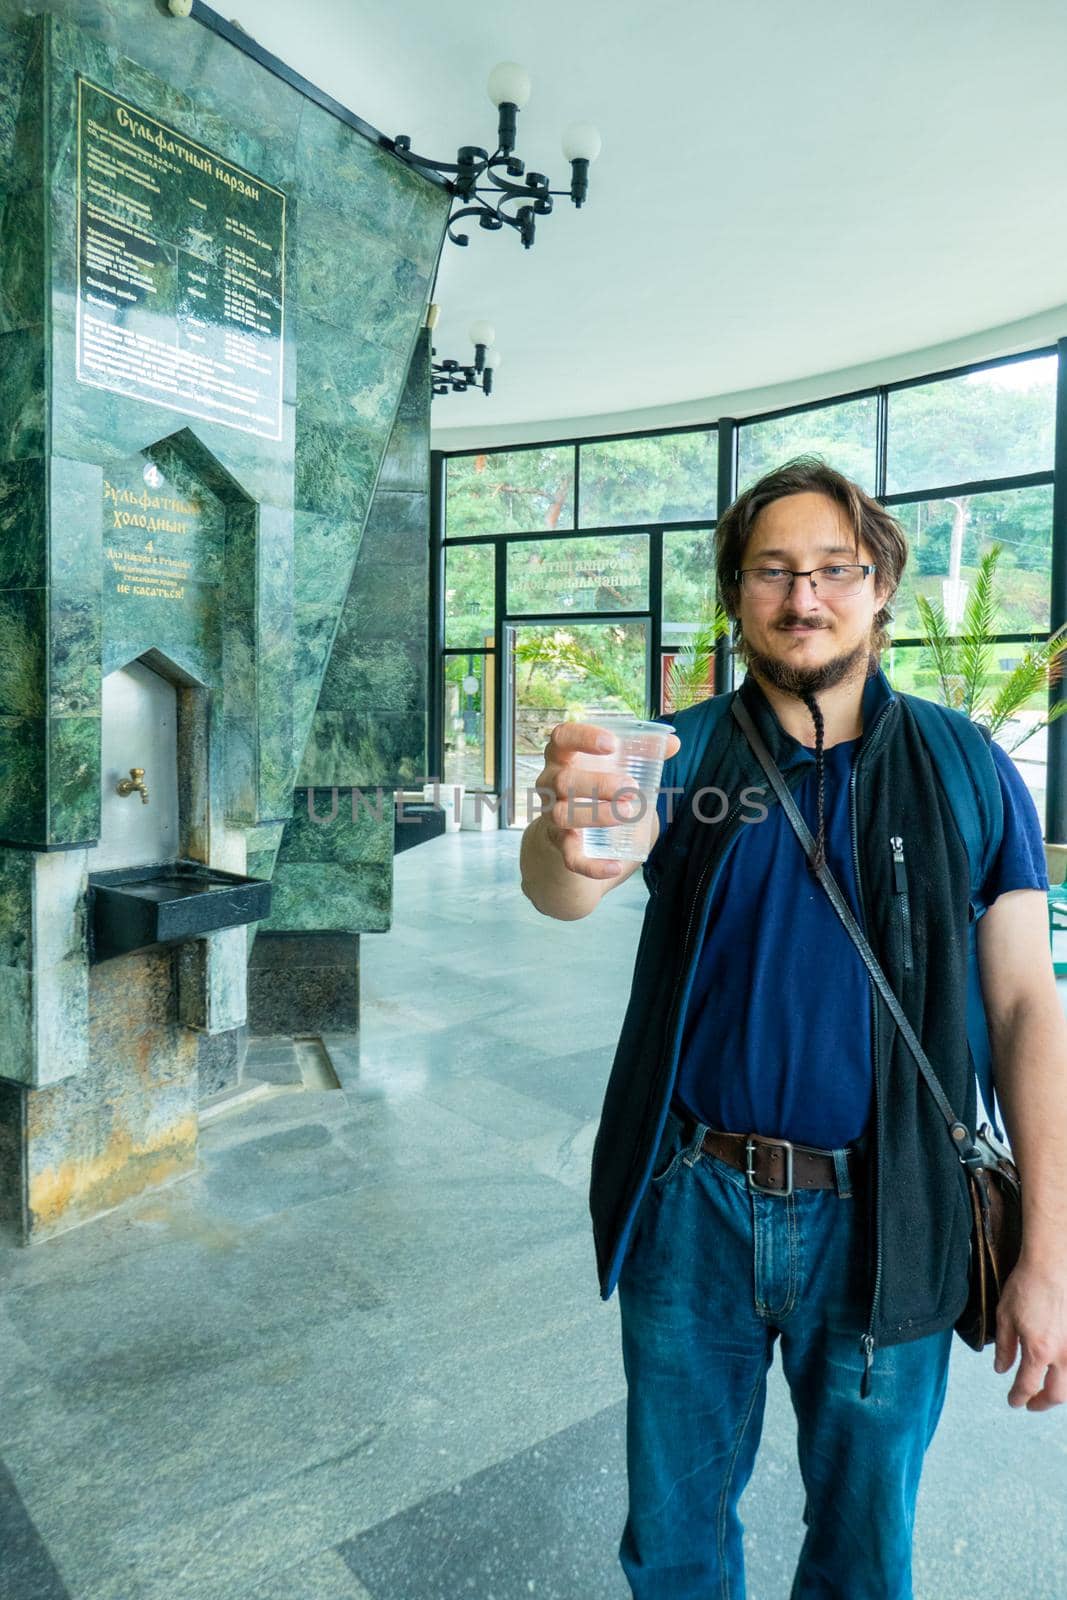 A man gives mineral thermal water in the disposable cup at the pump-room, close-up by kajasja